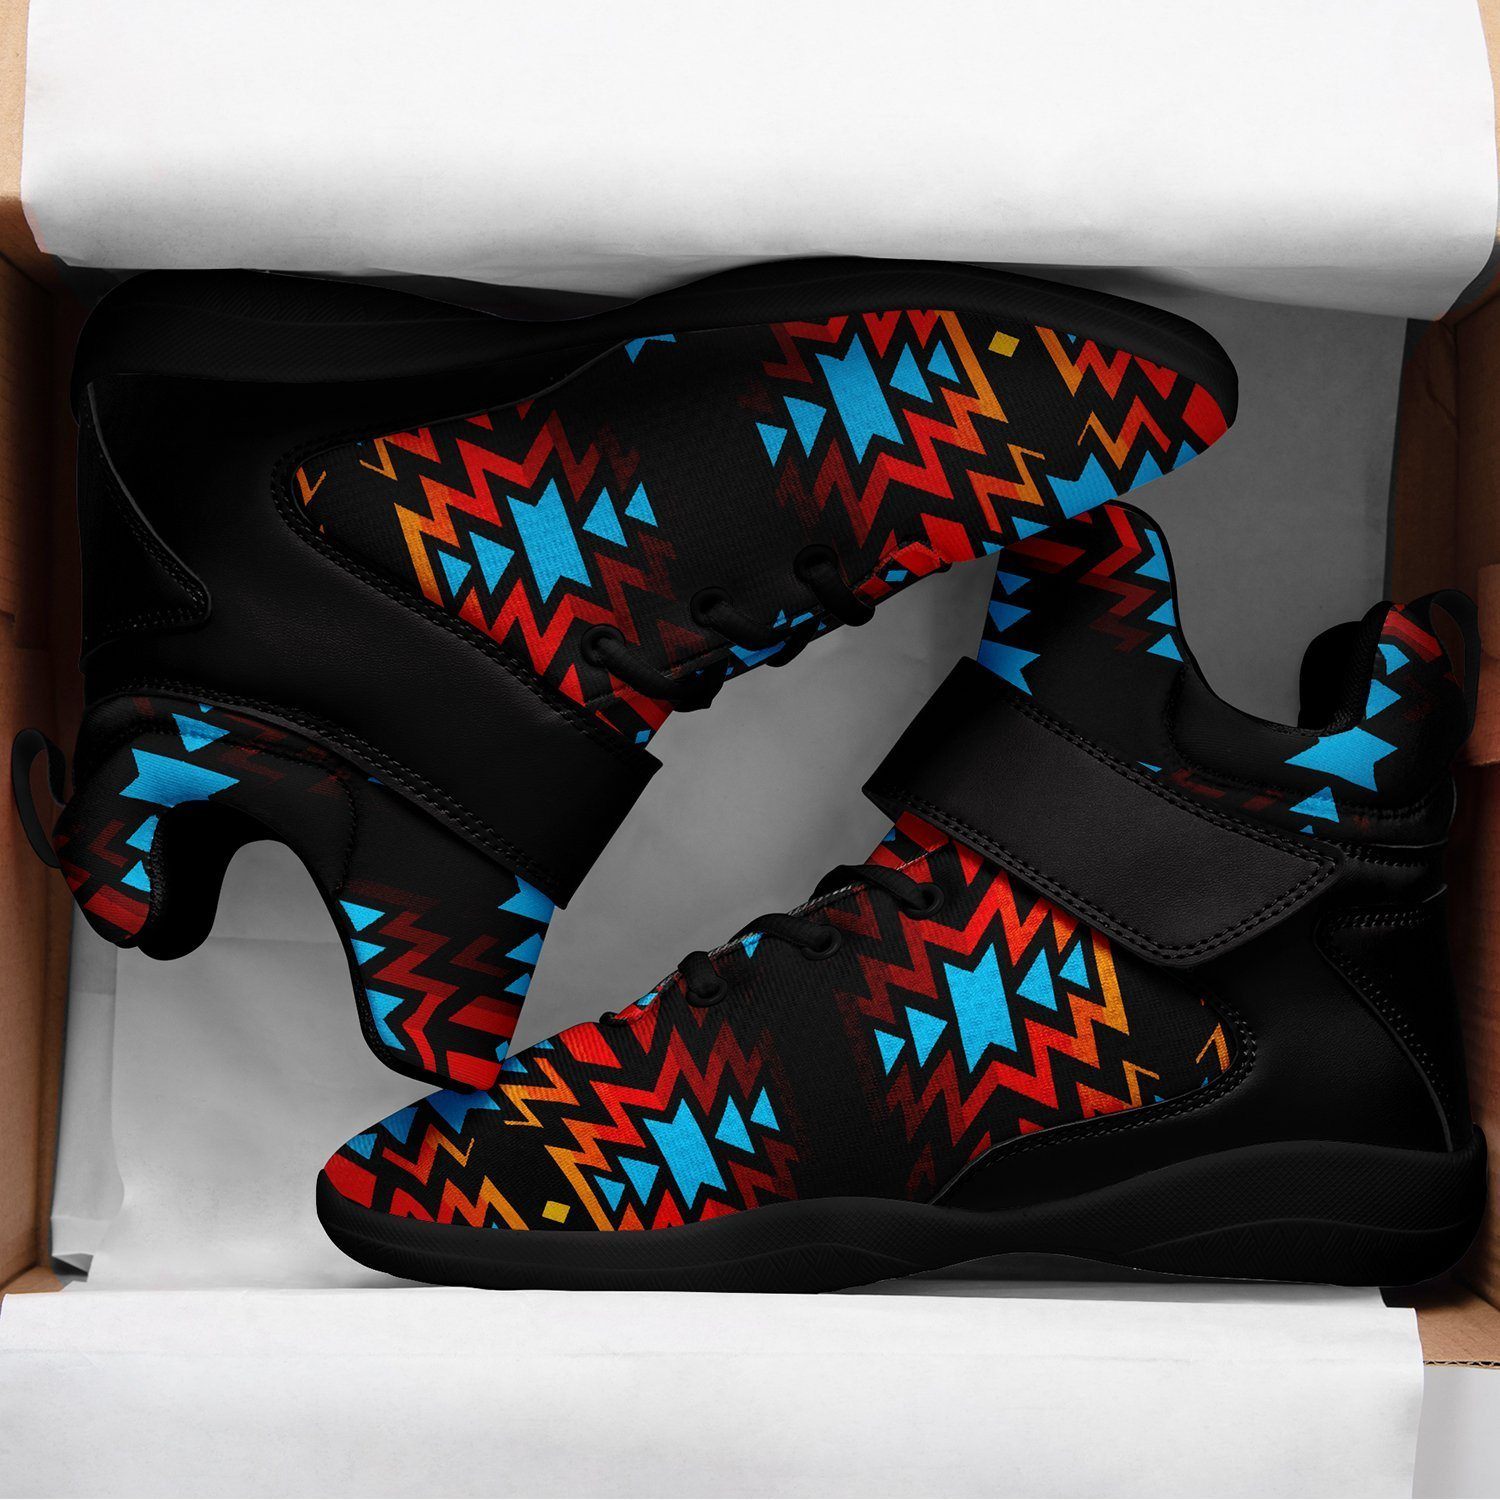 Black Fire and Turquoise Kid's Ipottaa Basketball / Sport High Top Shoes 49 Dzine 